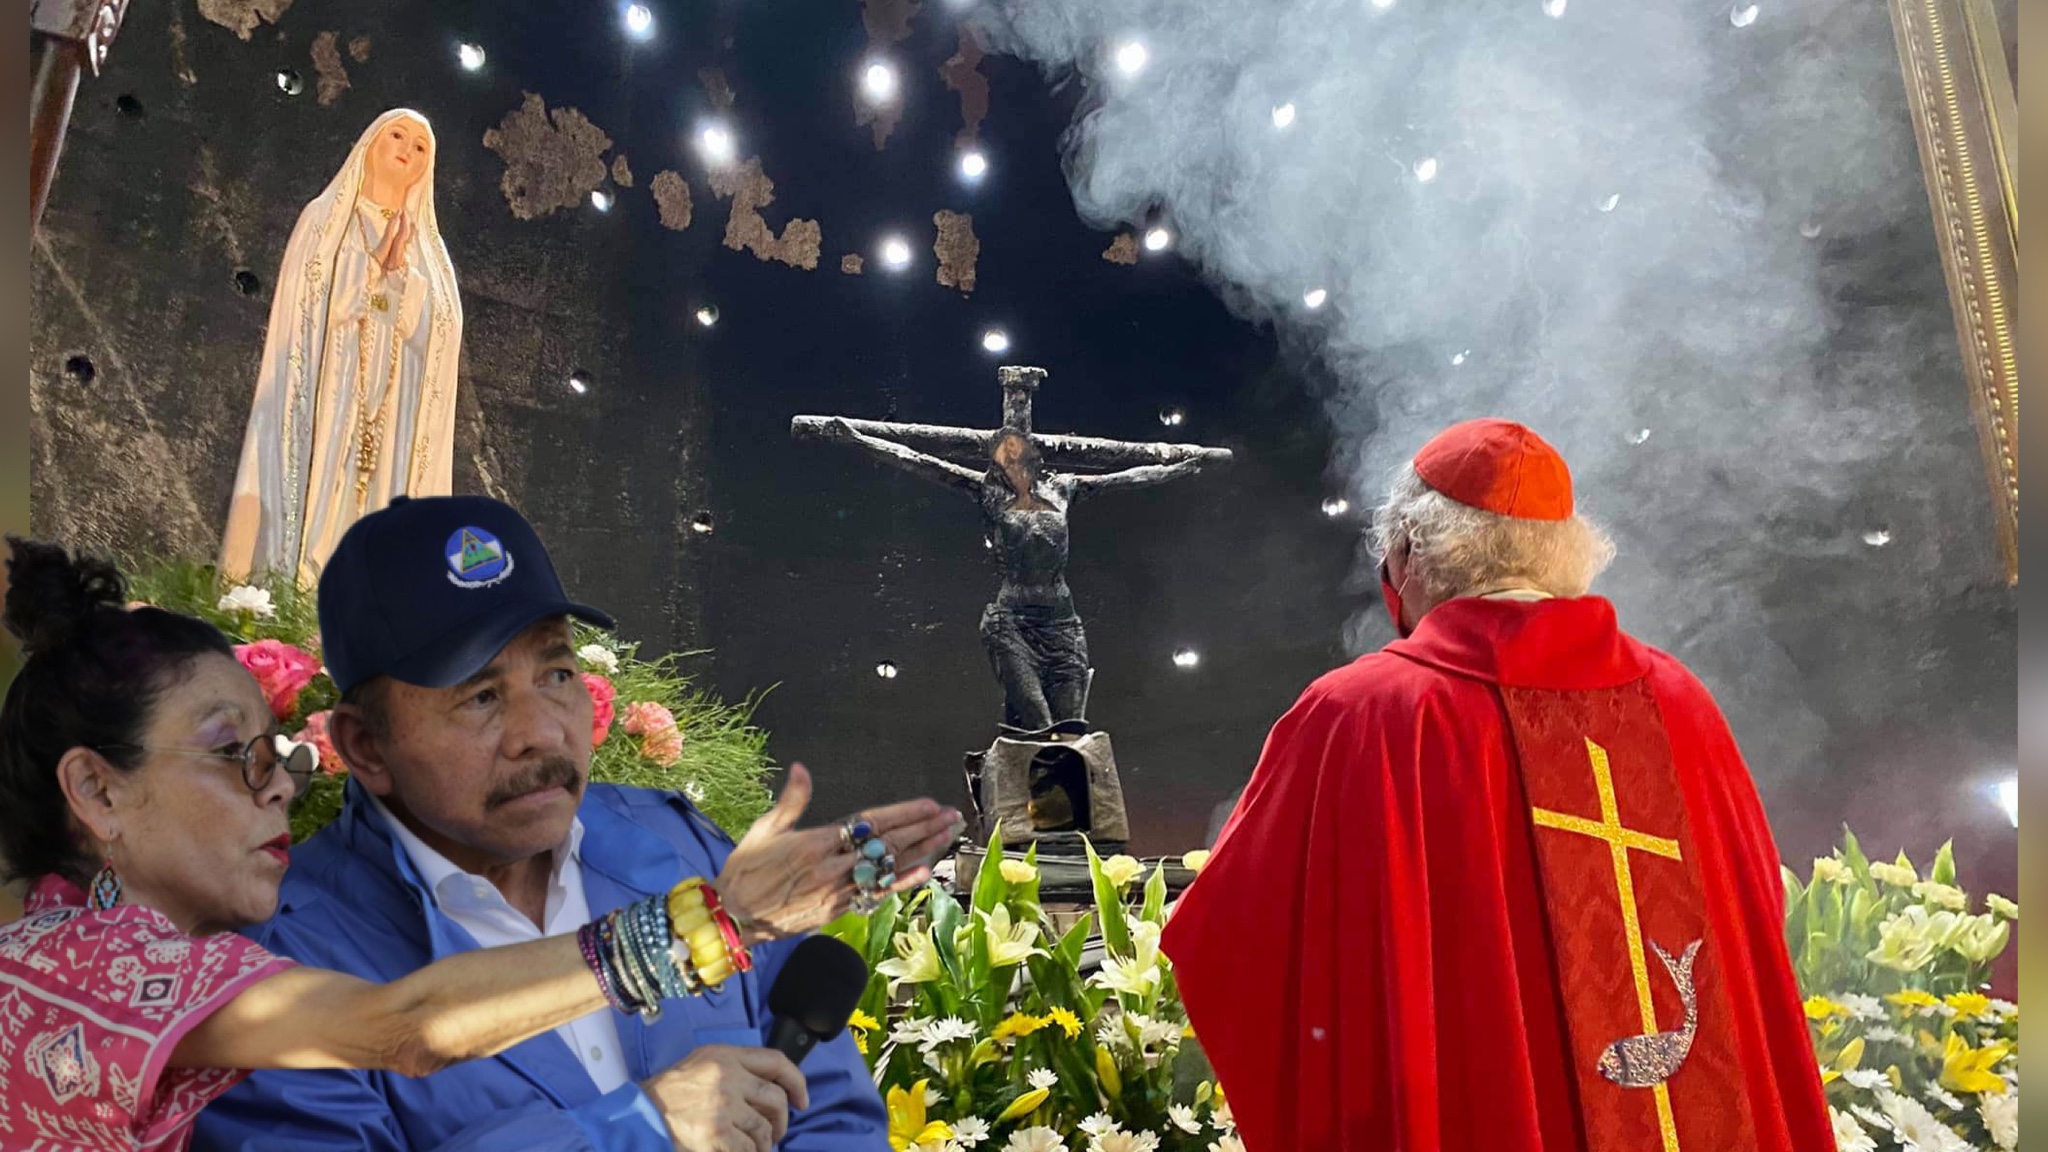 They ask the international community and the Vatican to "put limits on the dictatorship" of Nicaragua